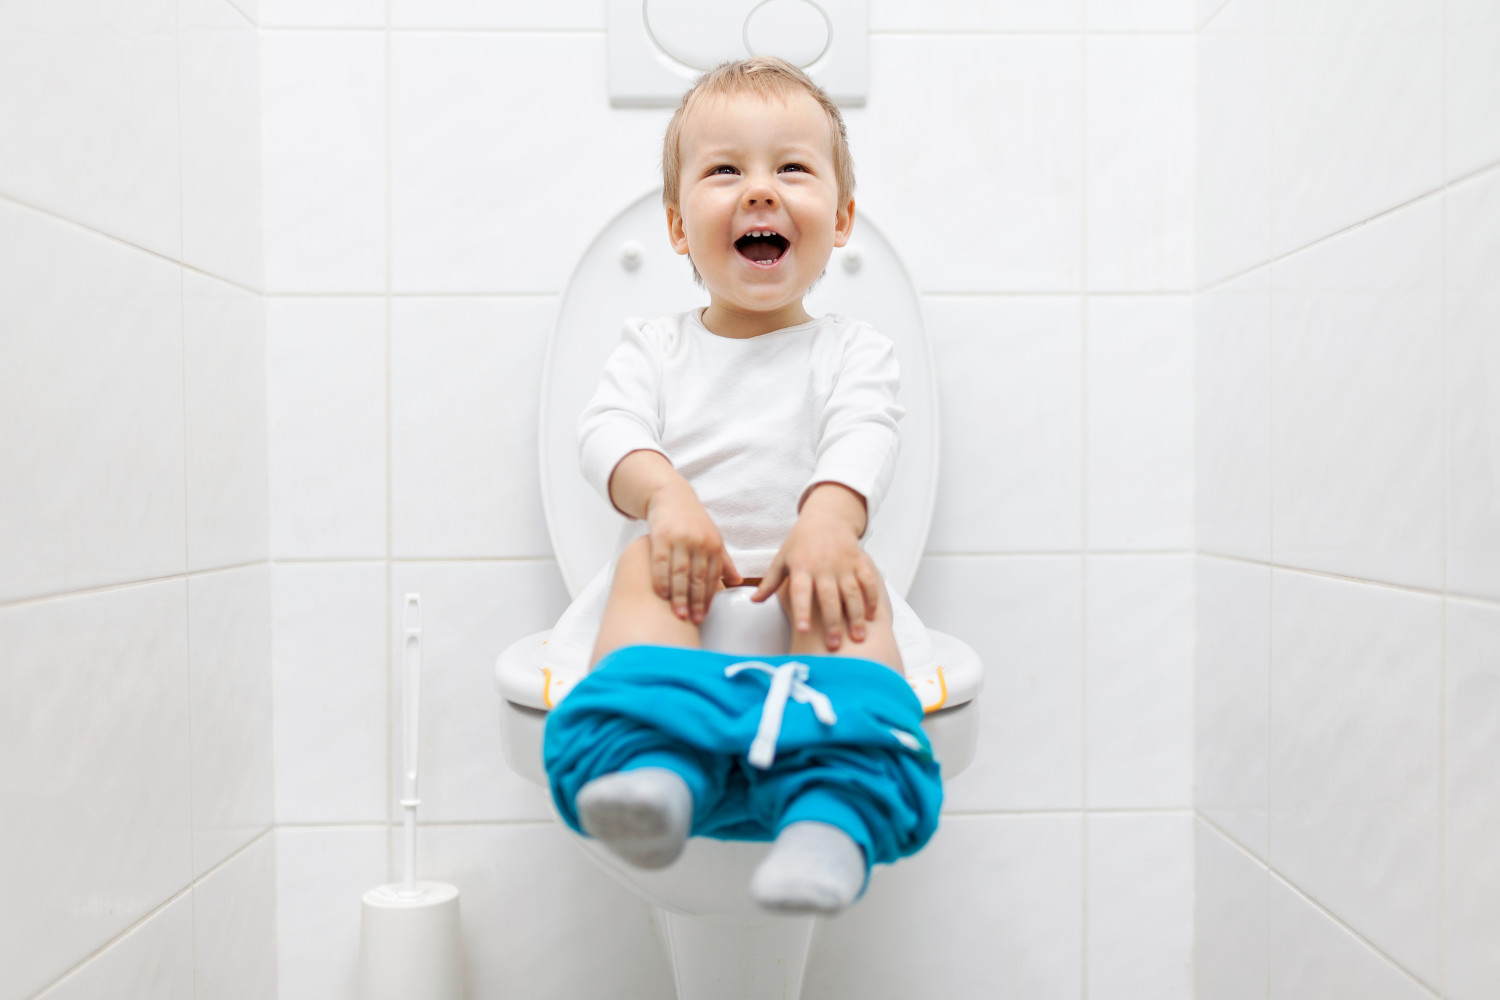 Timing nighttime potty training right